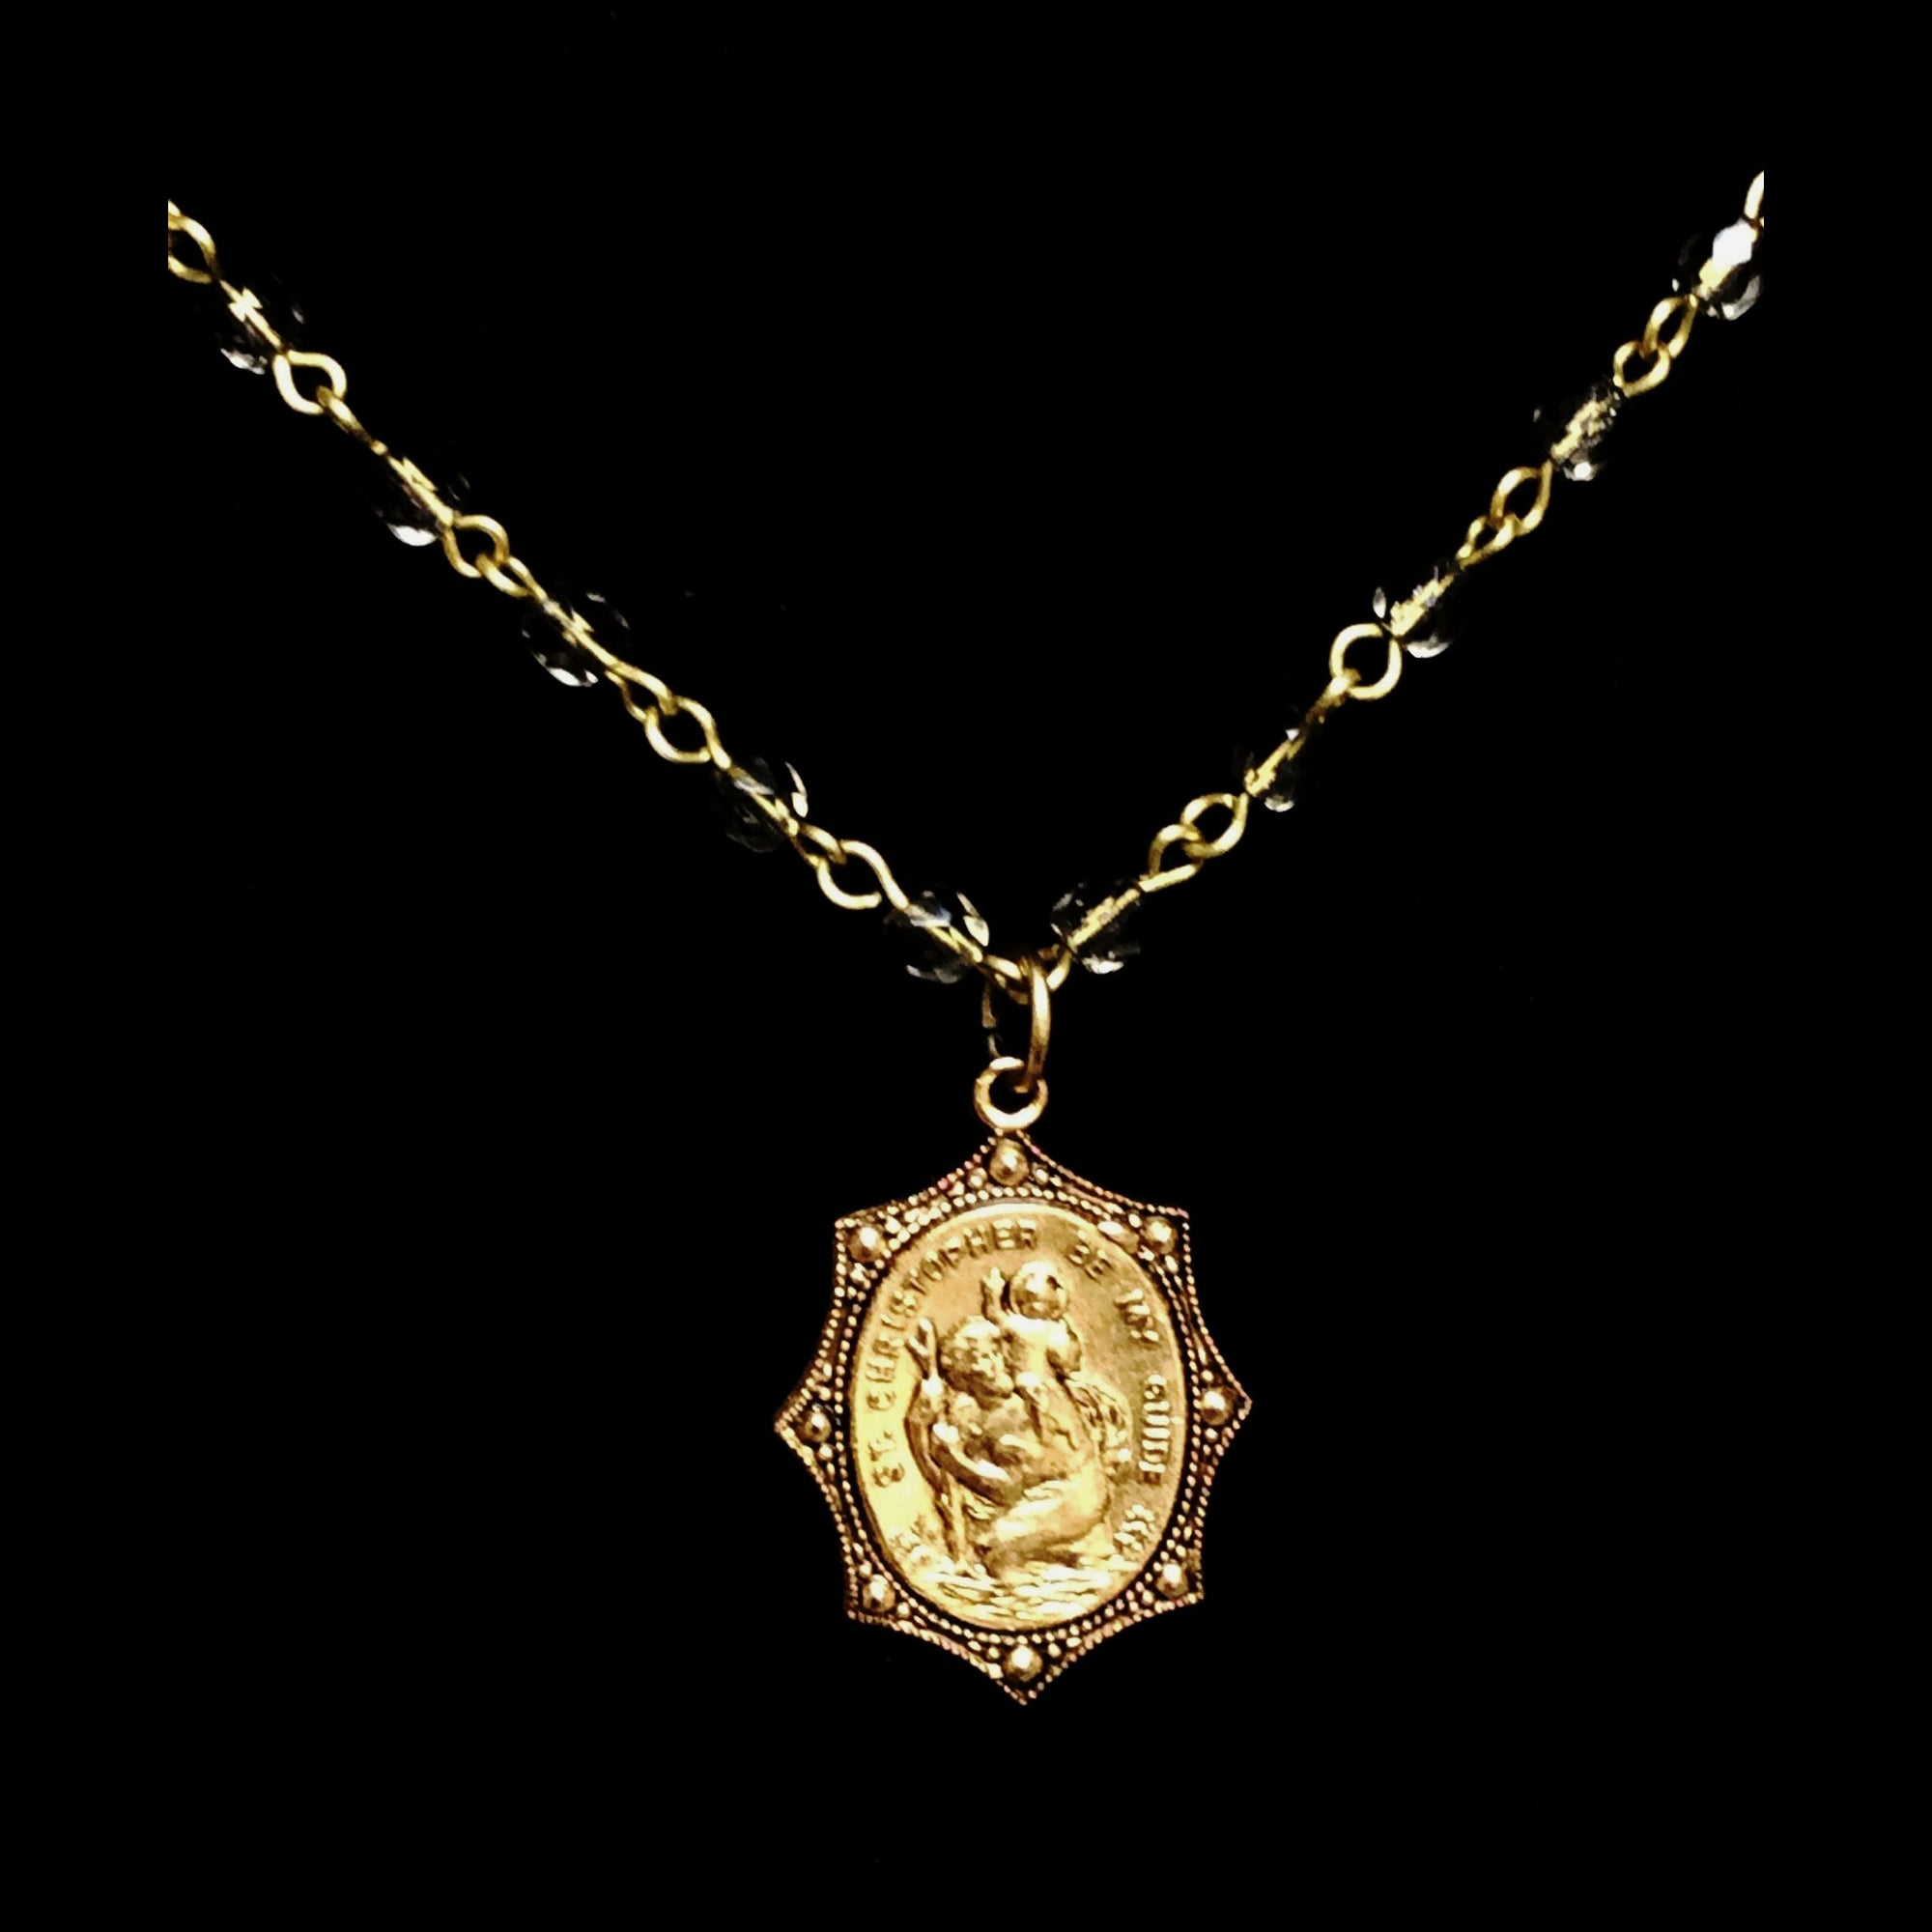 Forgotten Graces Saint Christopher Medal in Back Diamond and Gold Necklace